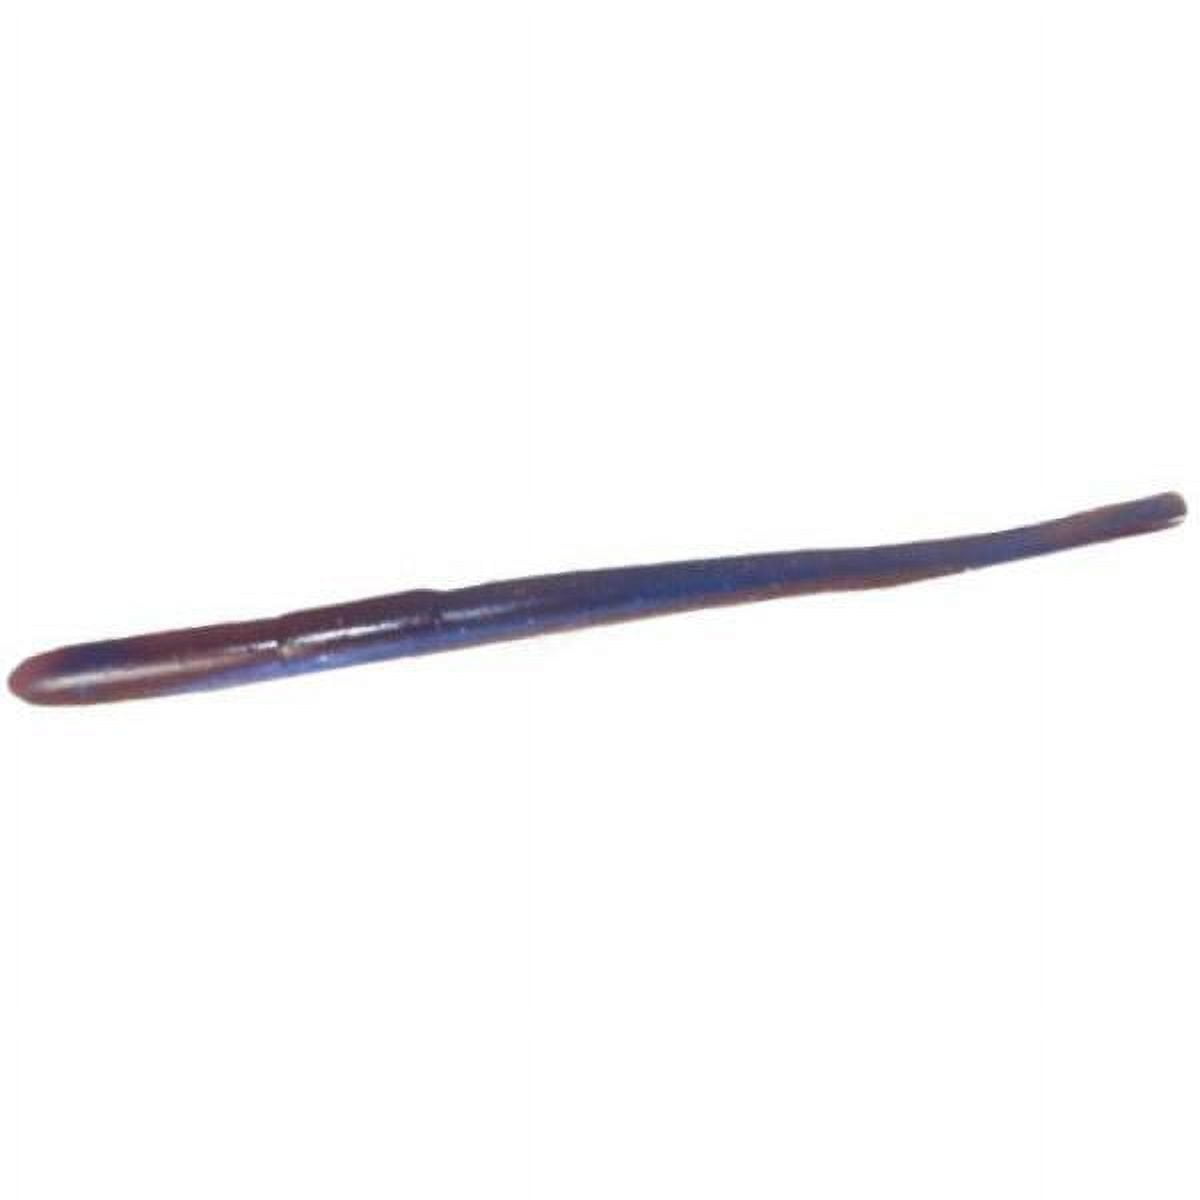 Roboworm Straight Tail Worm 6 inch Soft Plastic Worm 10 pack